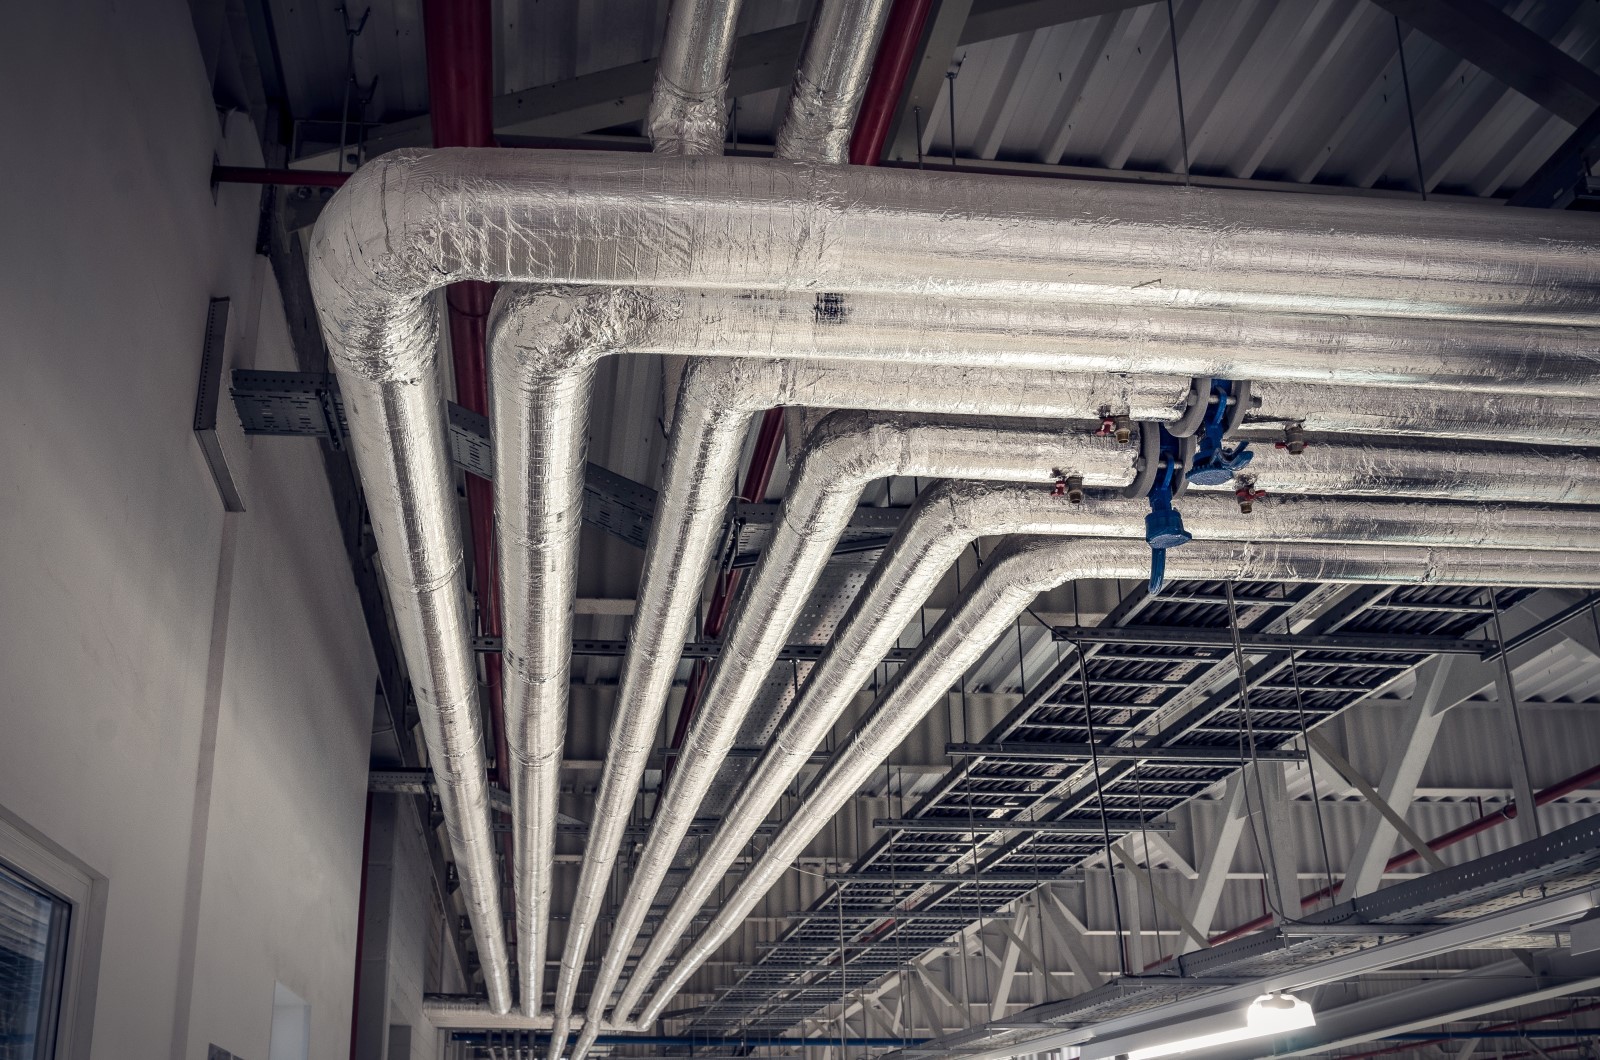 Proper mechanical insulation design around metal pipes provides optimal energy conservation in an industrial building.